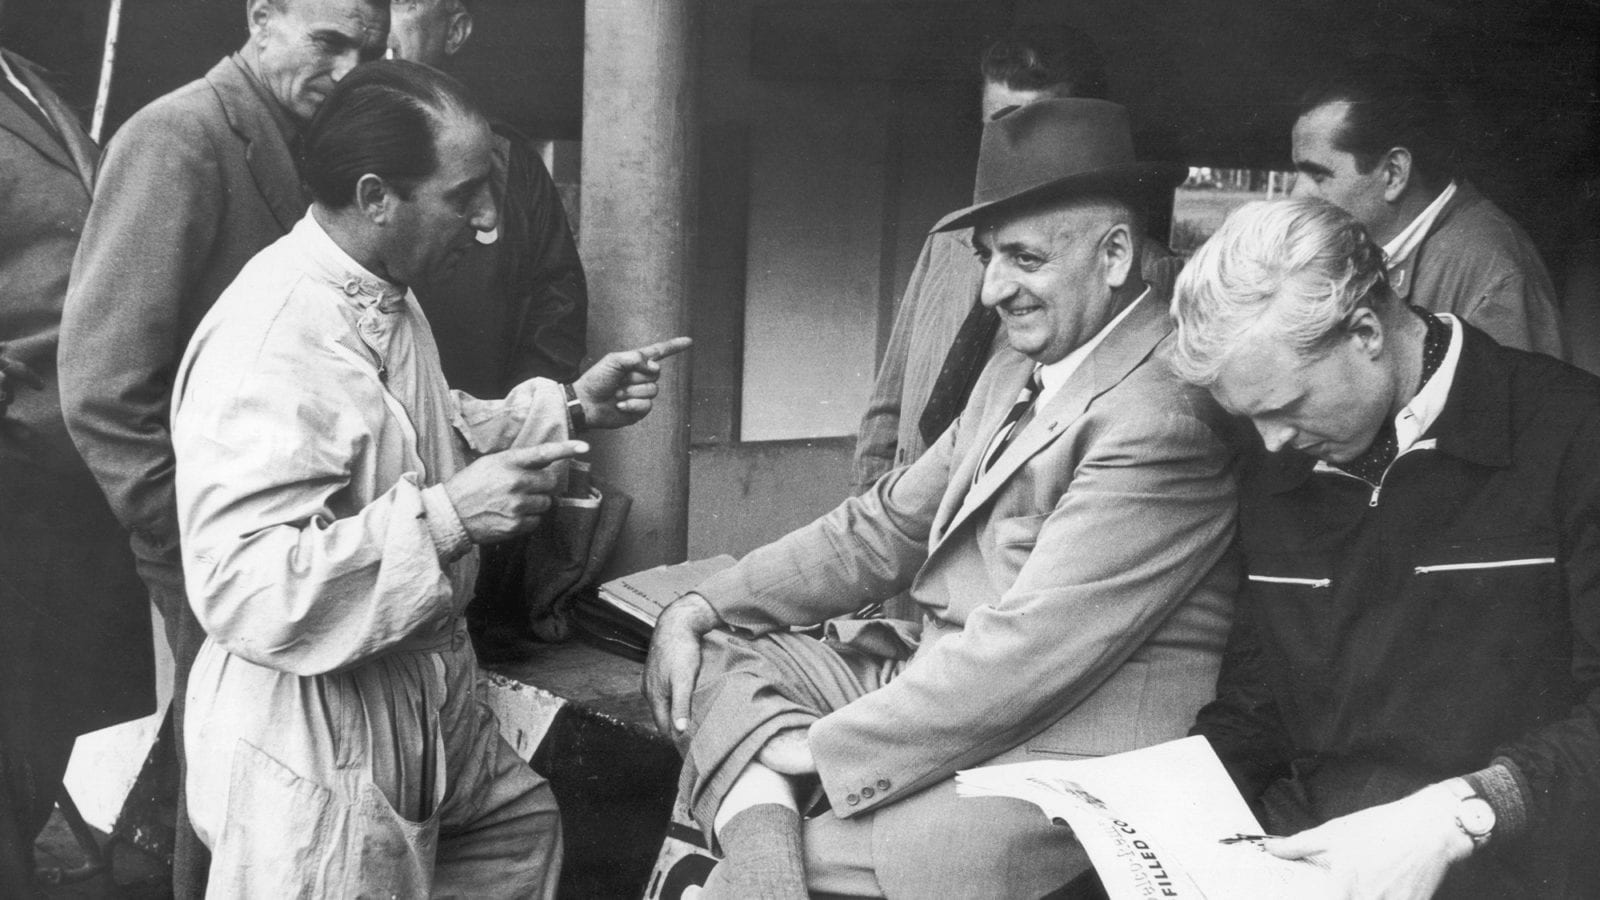 Alberto Ascari speaks with Enzo at Monza, while Mike Hawthorn reads alongside